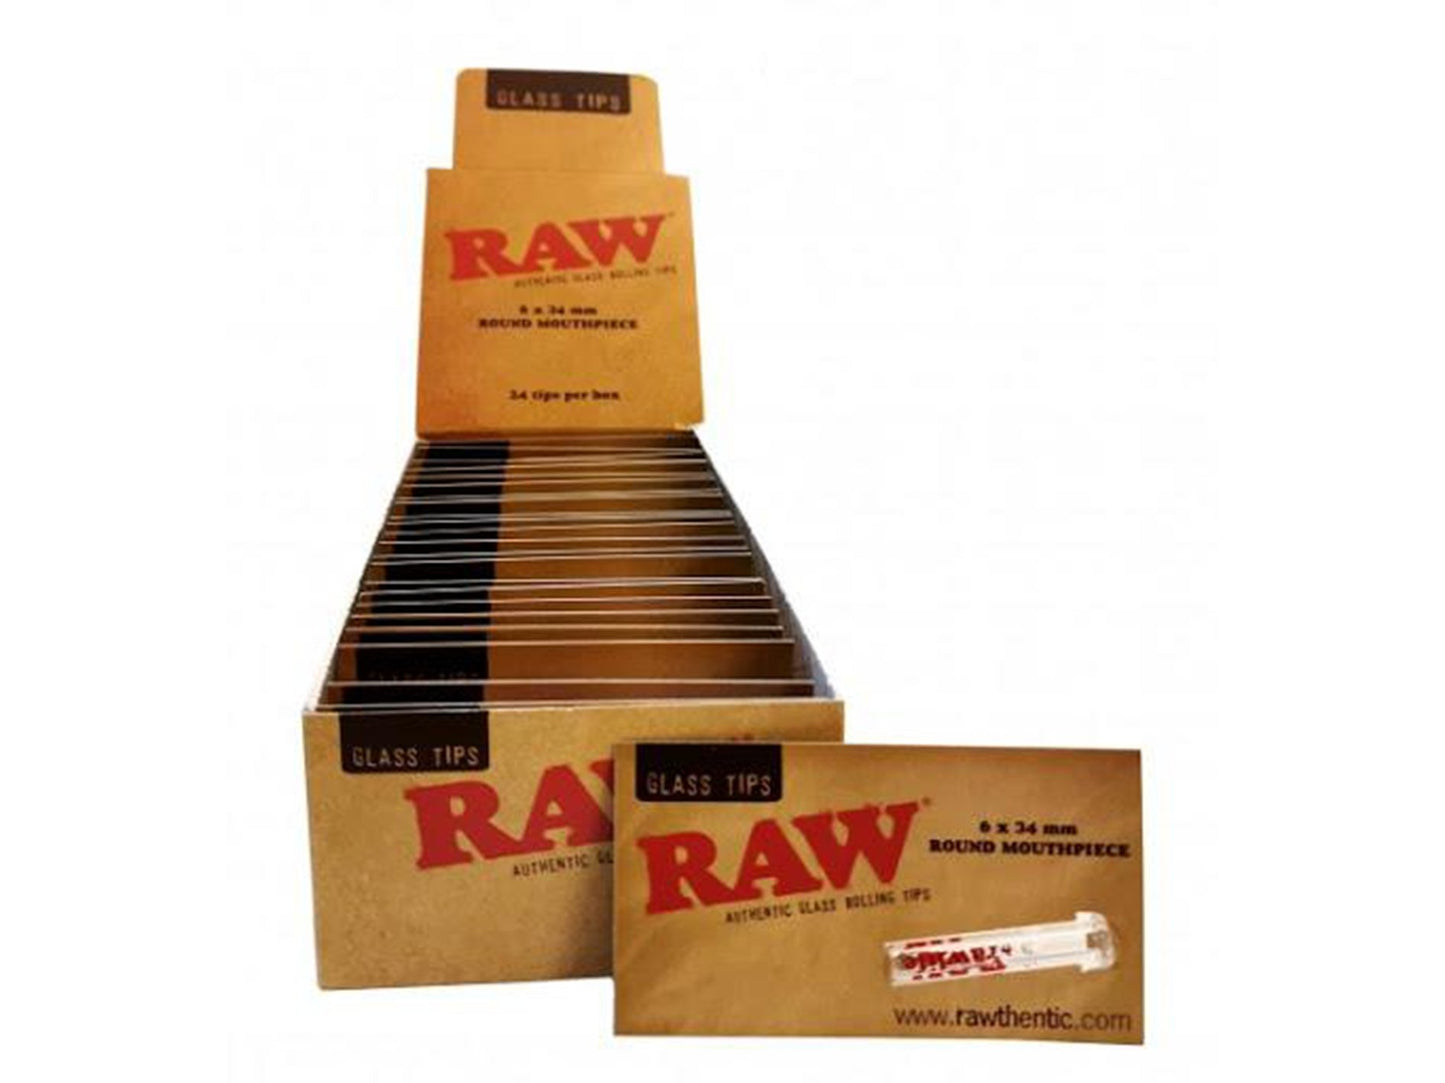 RAW Glass Tips With Round Mouthpiece - Full 24 Per Box - VIR Wholesale